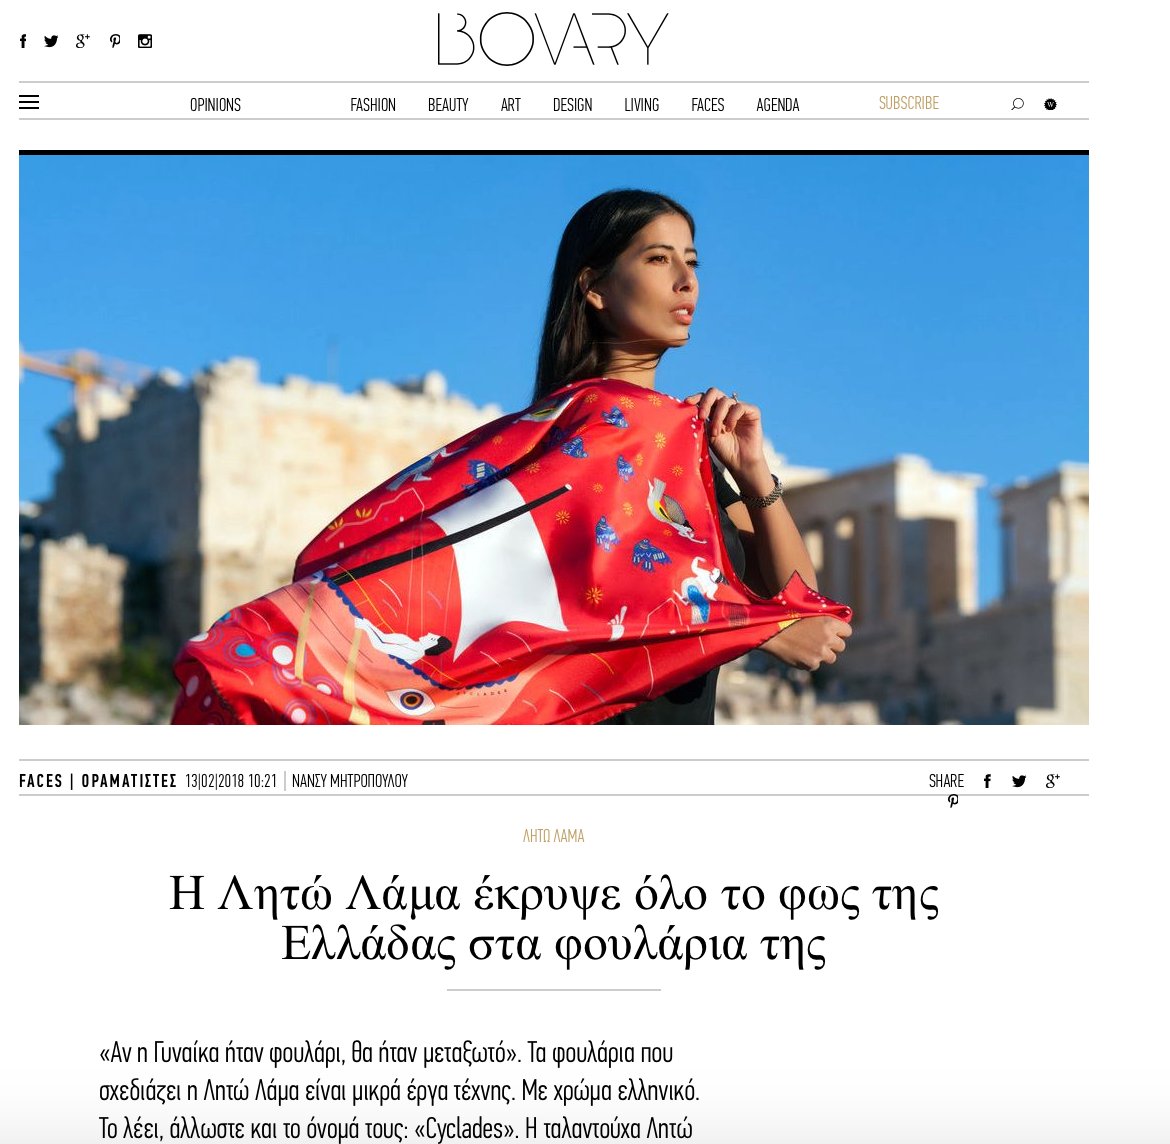 Leto Lama Interview for Bovary.gr Cyclades Luxury Silk Scarves and Accessories